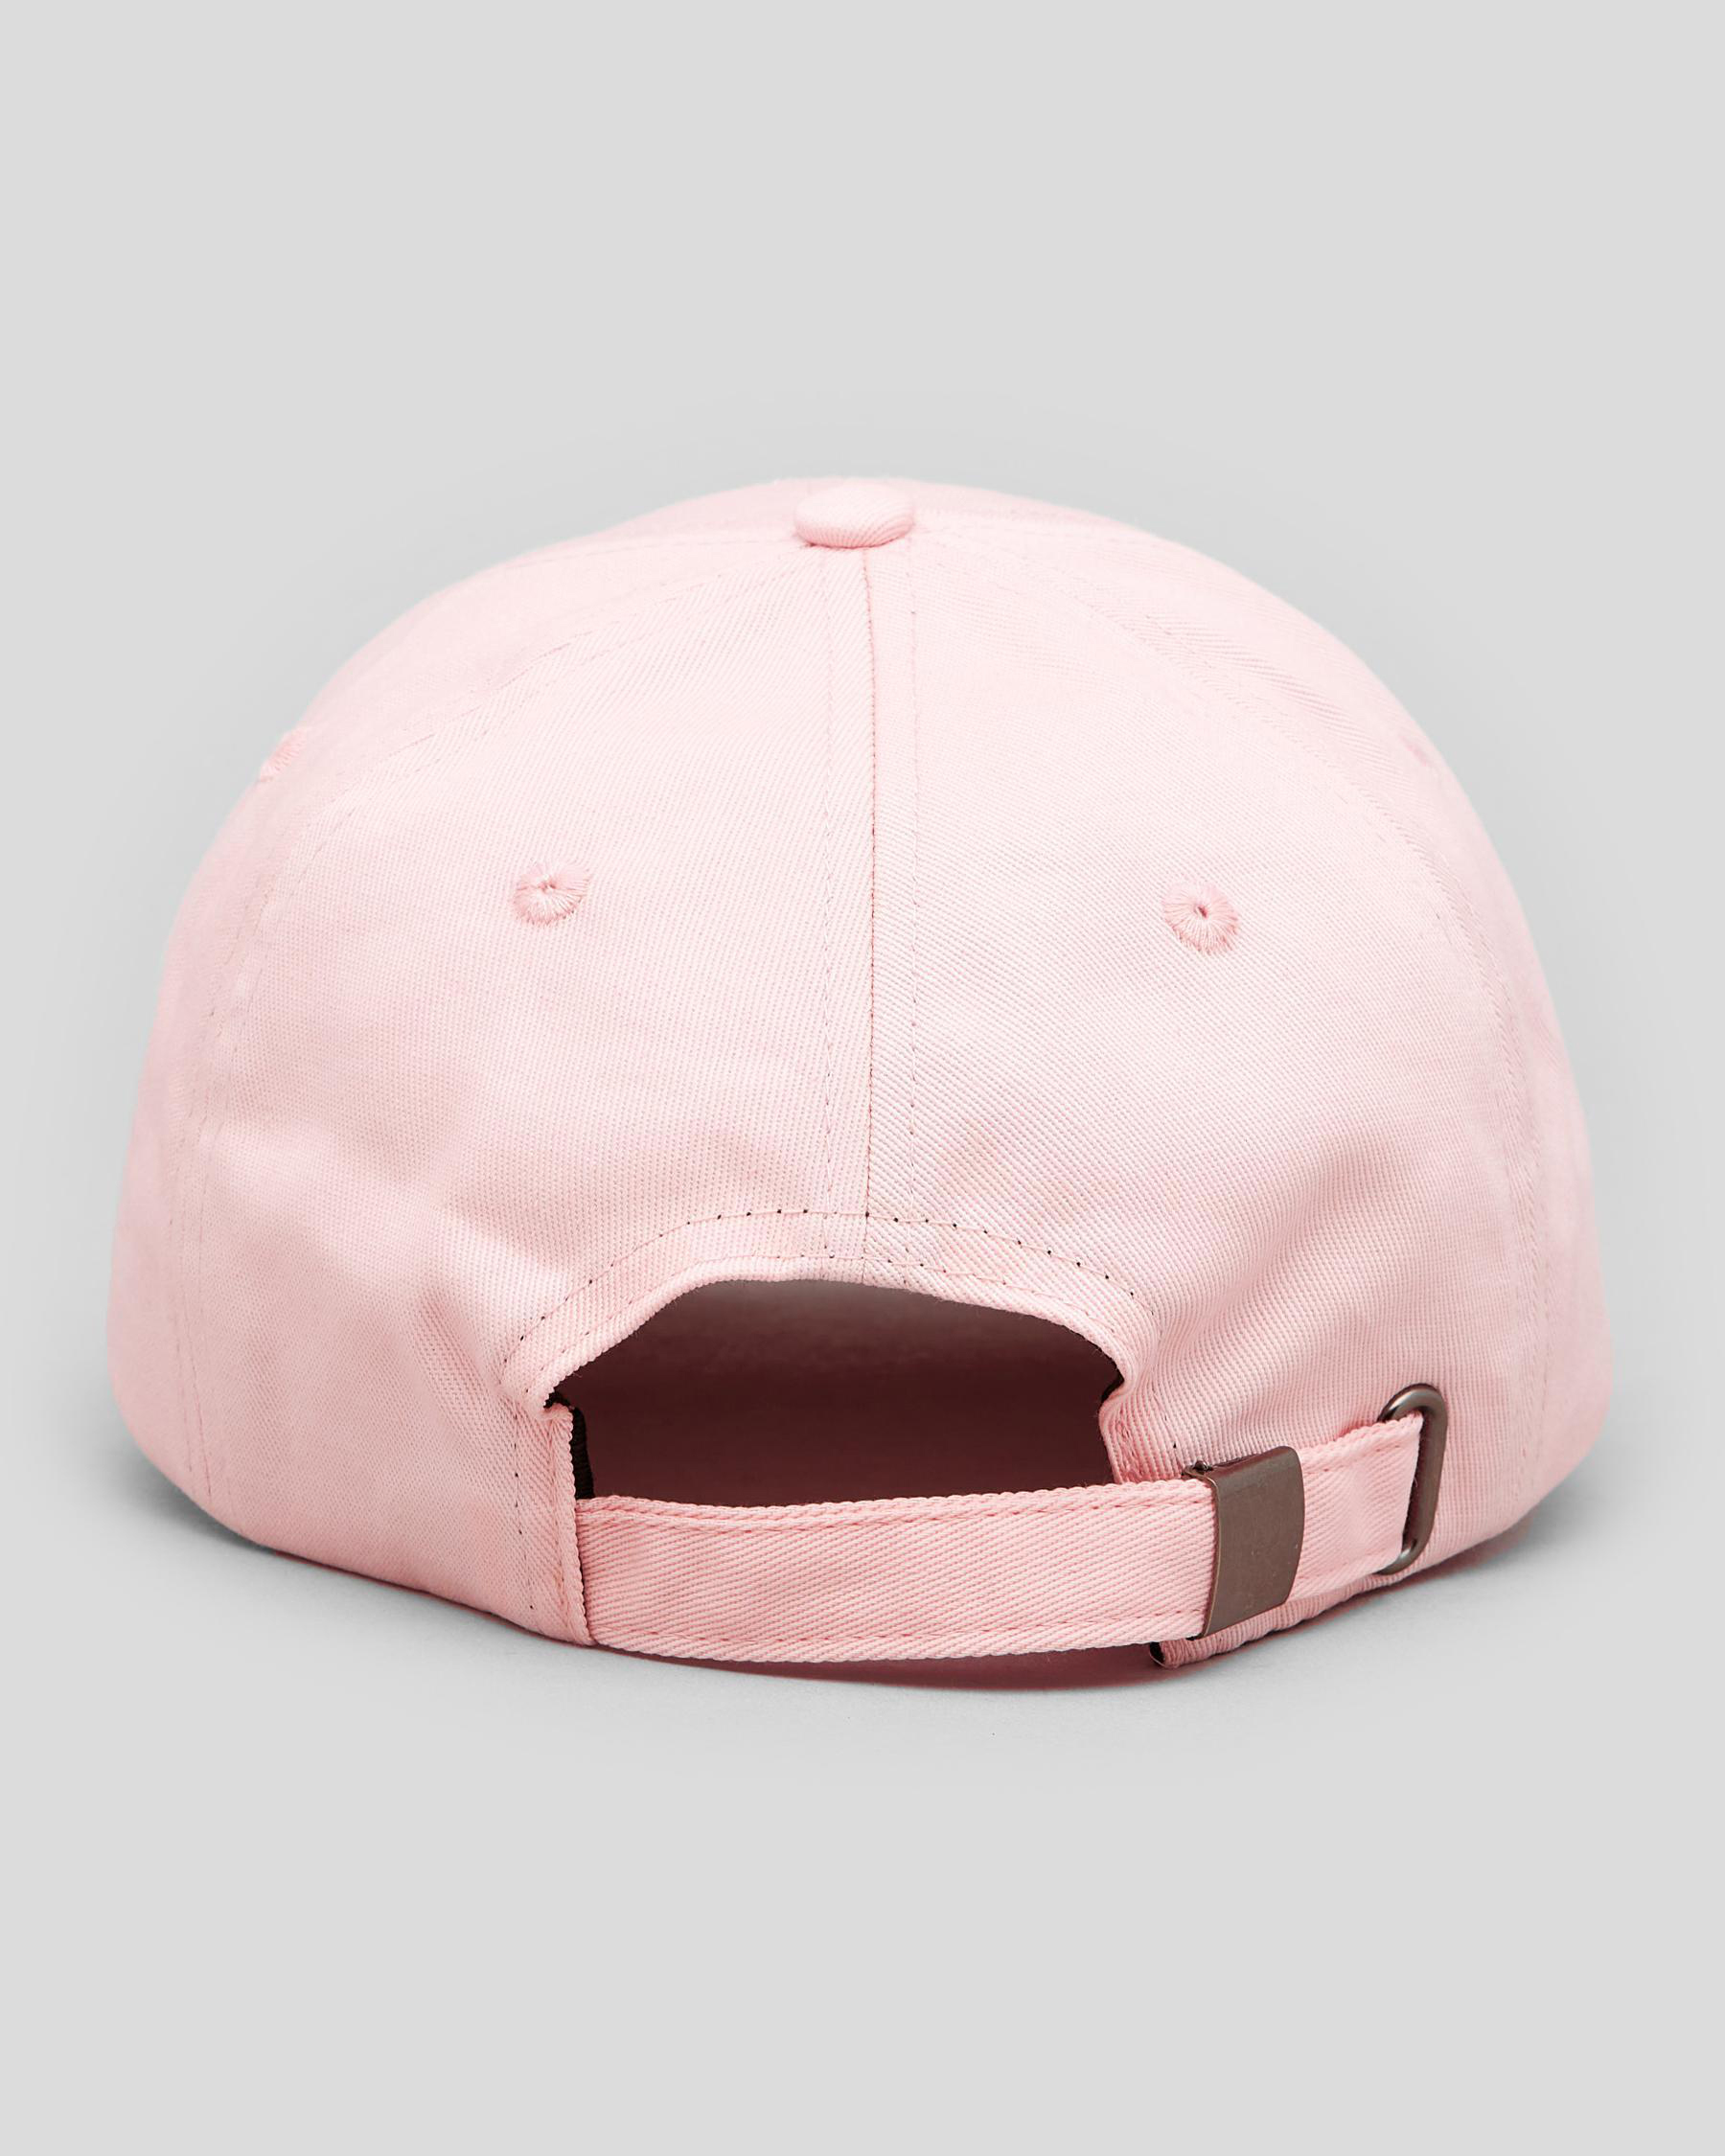 Playboy Curved Peak Soft Cap In Pink - Fast Shipping & Easy Returns ...